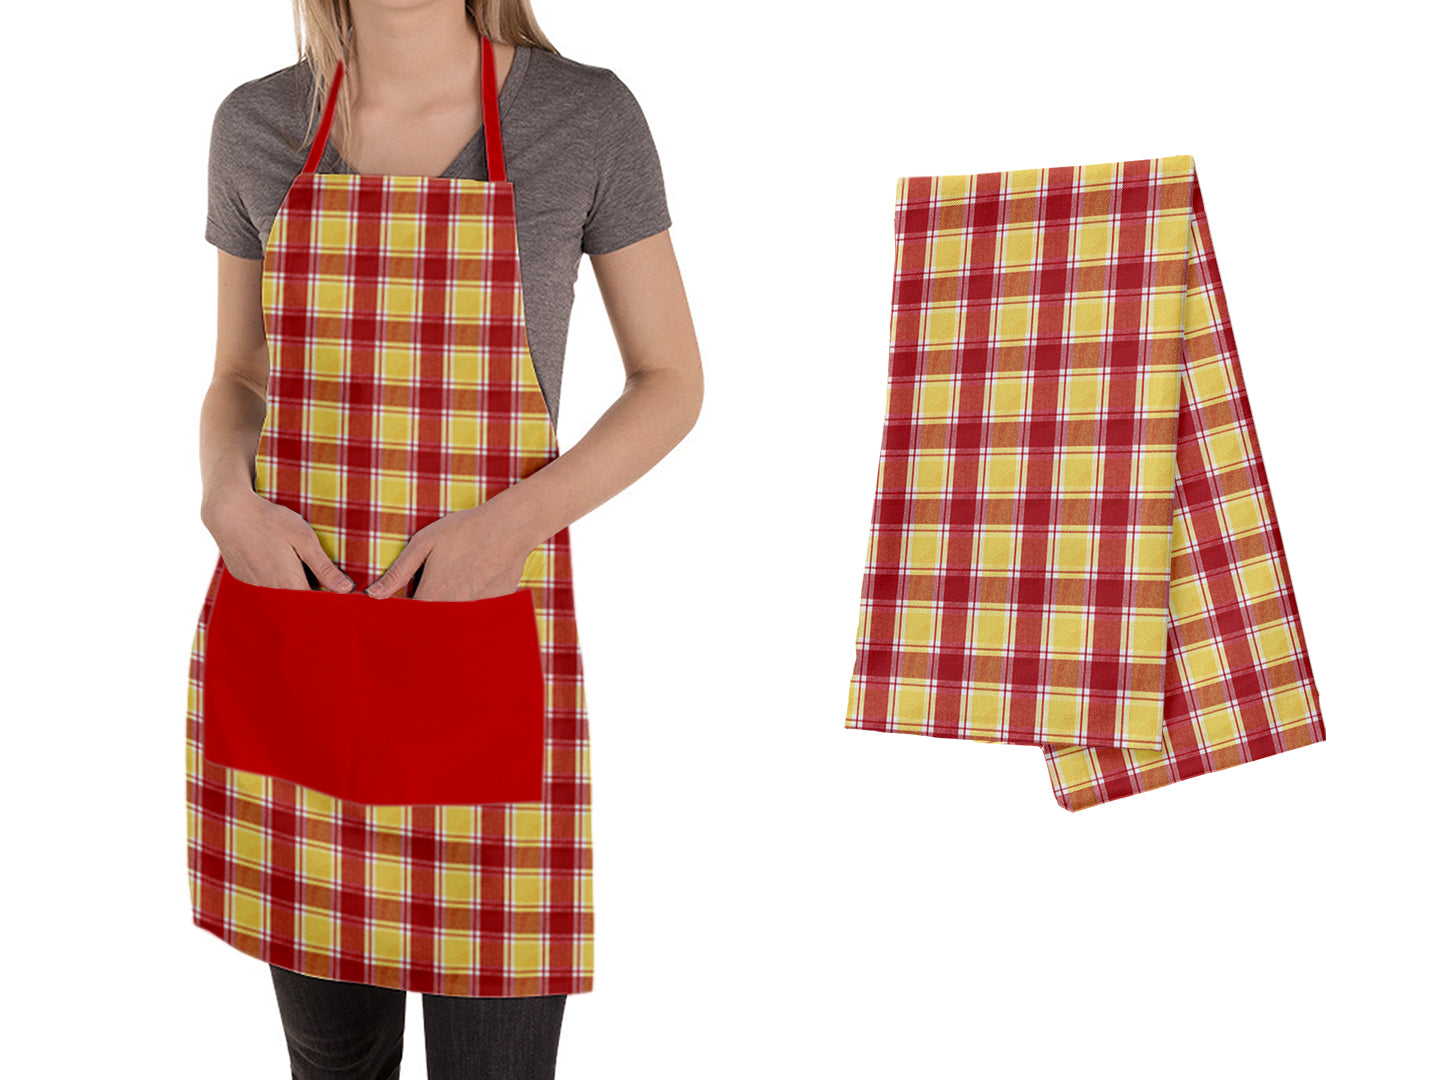 Lushomes Checks red and yellow Kitchen Cooking Apron Set for Women, apron for men, cooking aprons for women, kitchen apron for men, aprons, aprin (2 Pc Set, Kitchen T 40 x 60 cm, Apron 60 x 80 cms)